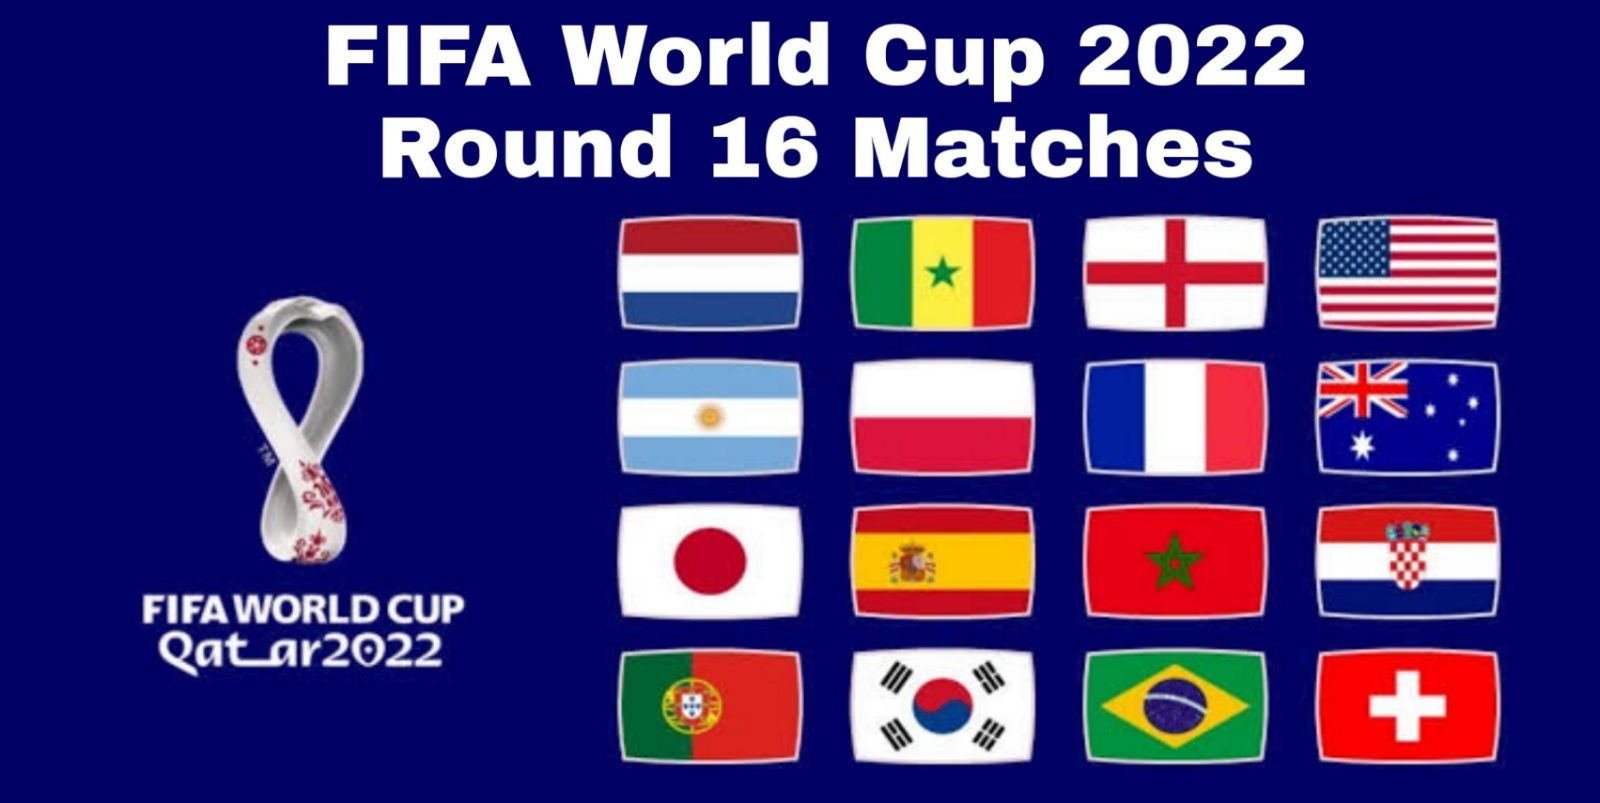 FIFA World Cup 2022 Round of 16 matches